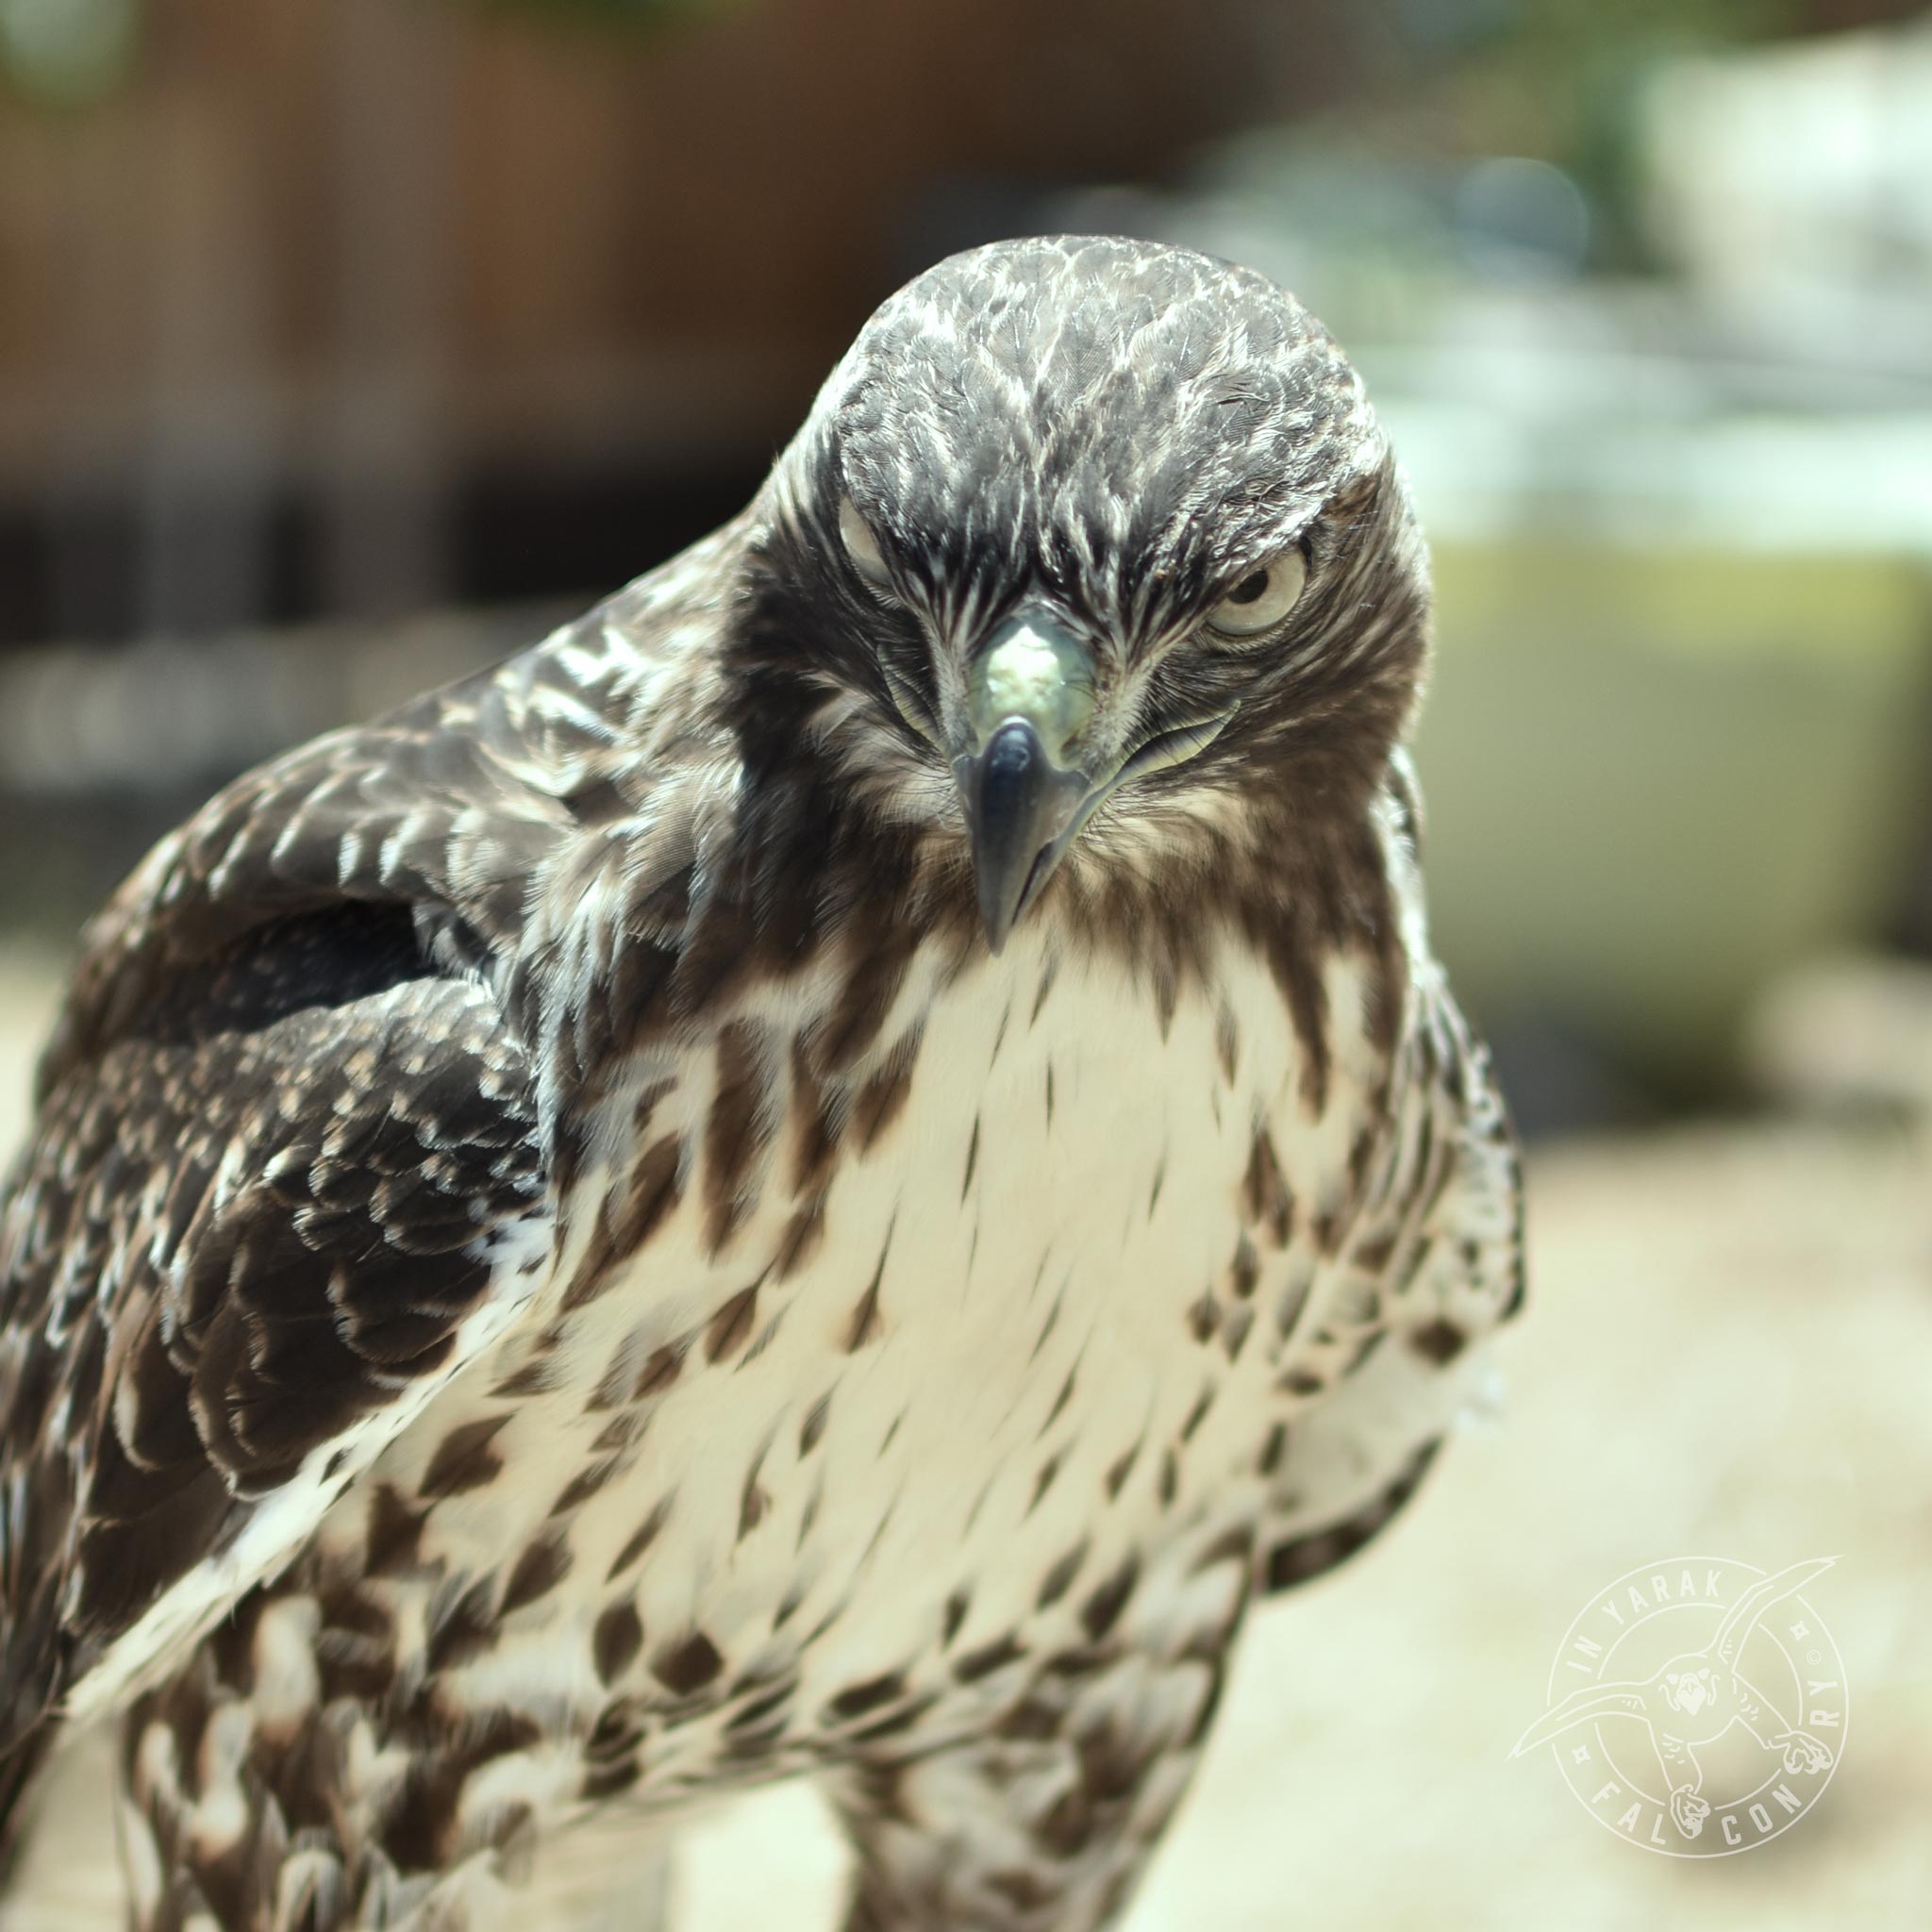 Ace the passage red tailed hawk says don't trust